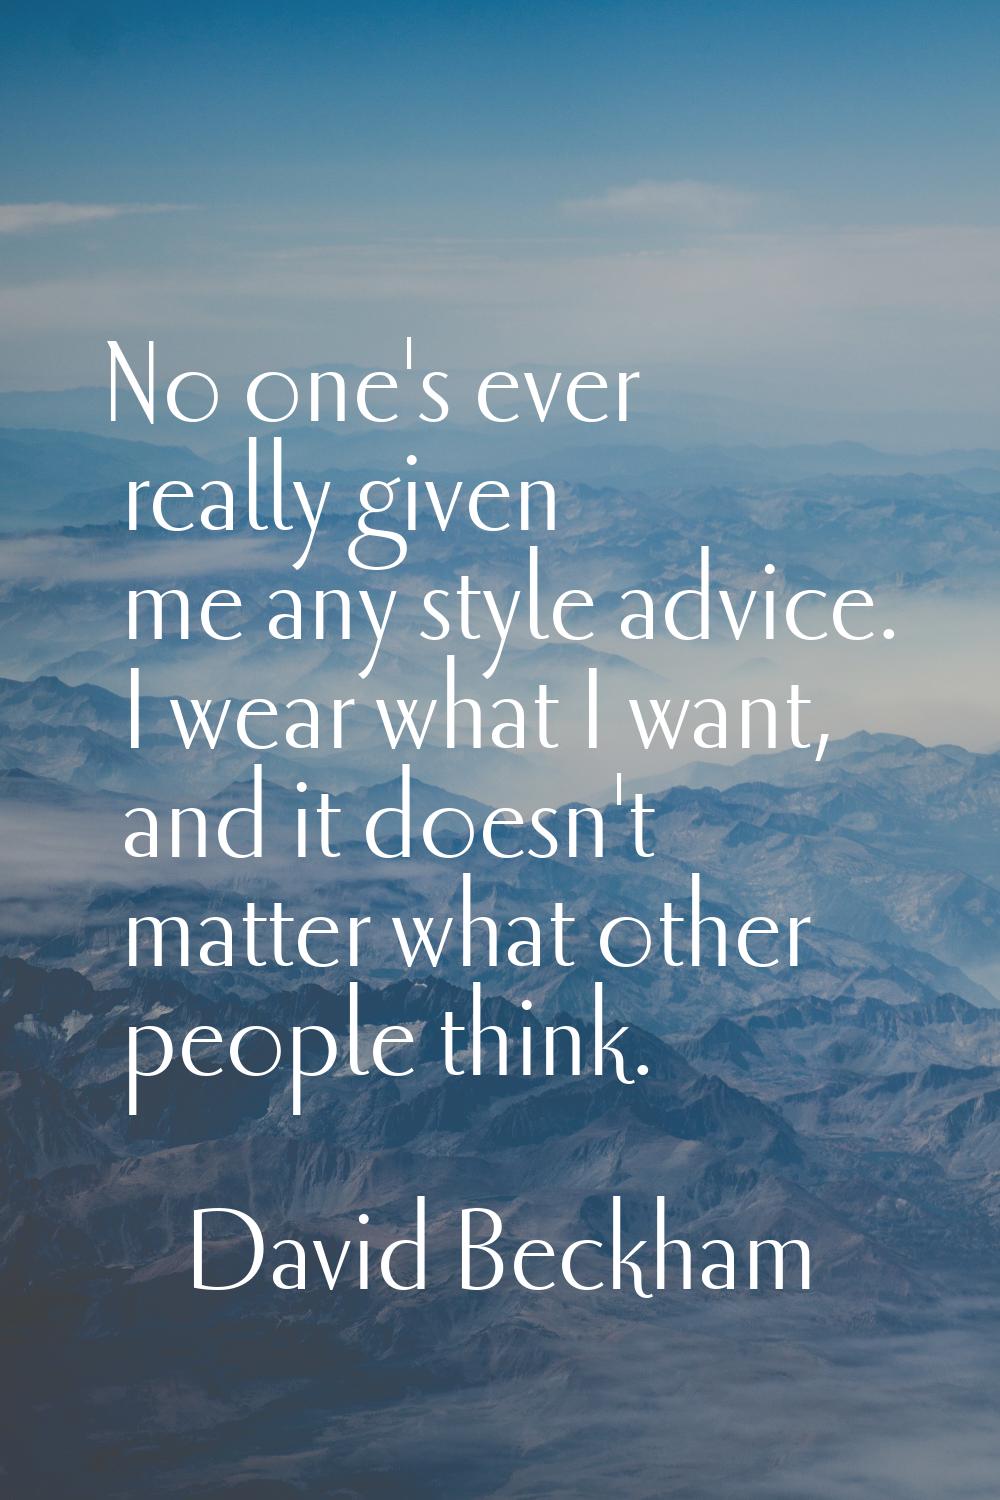 No one's ever really given me any style advice. I wear what I want, and it doesn't matter what othe